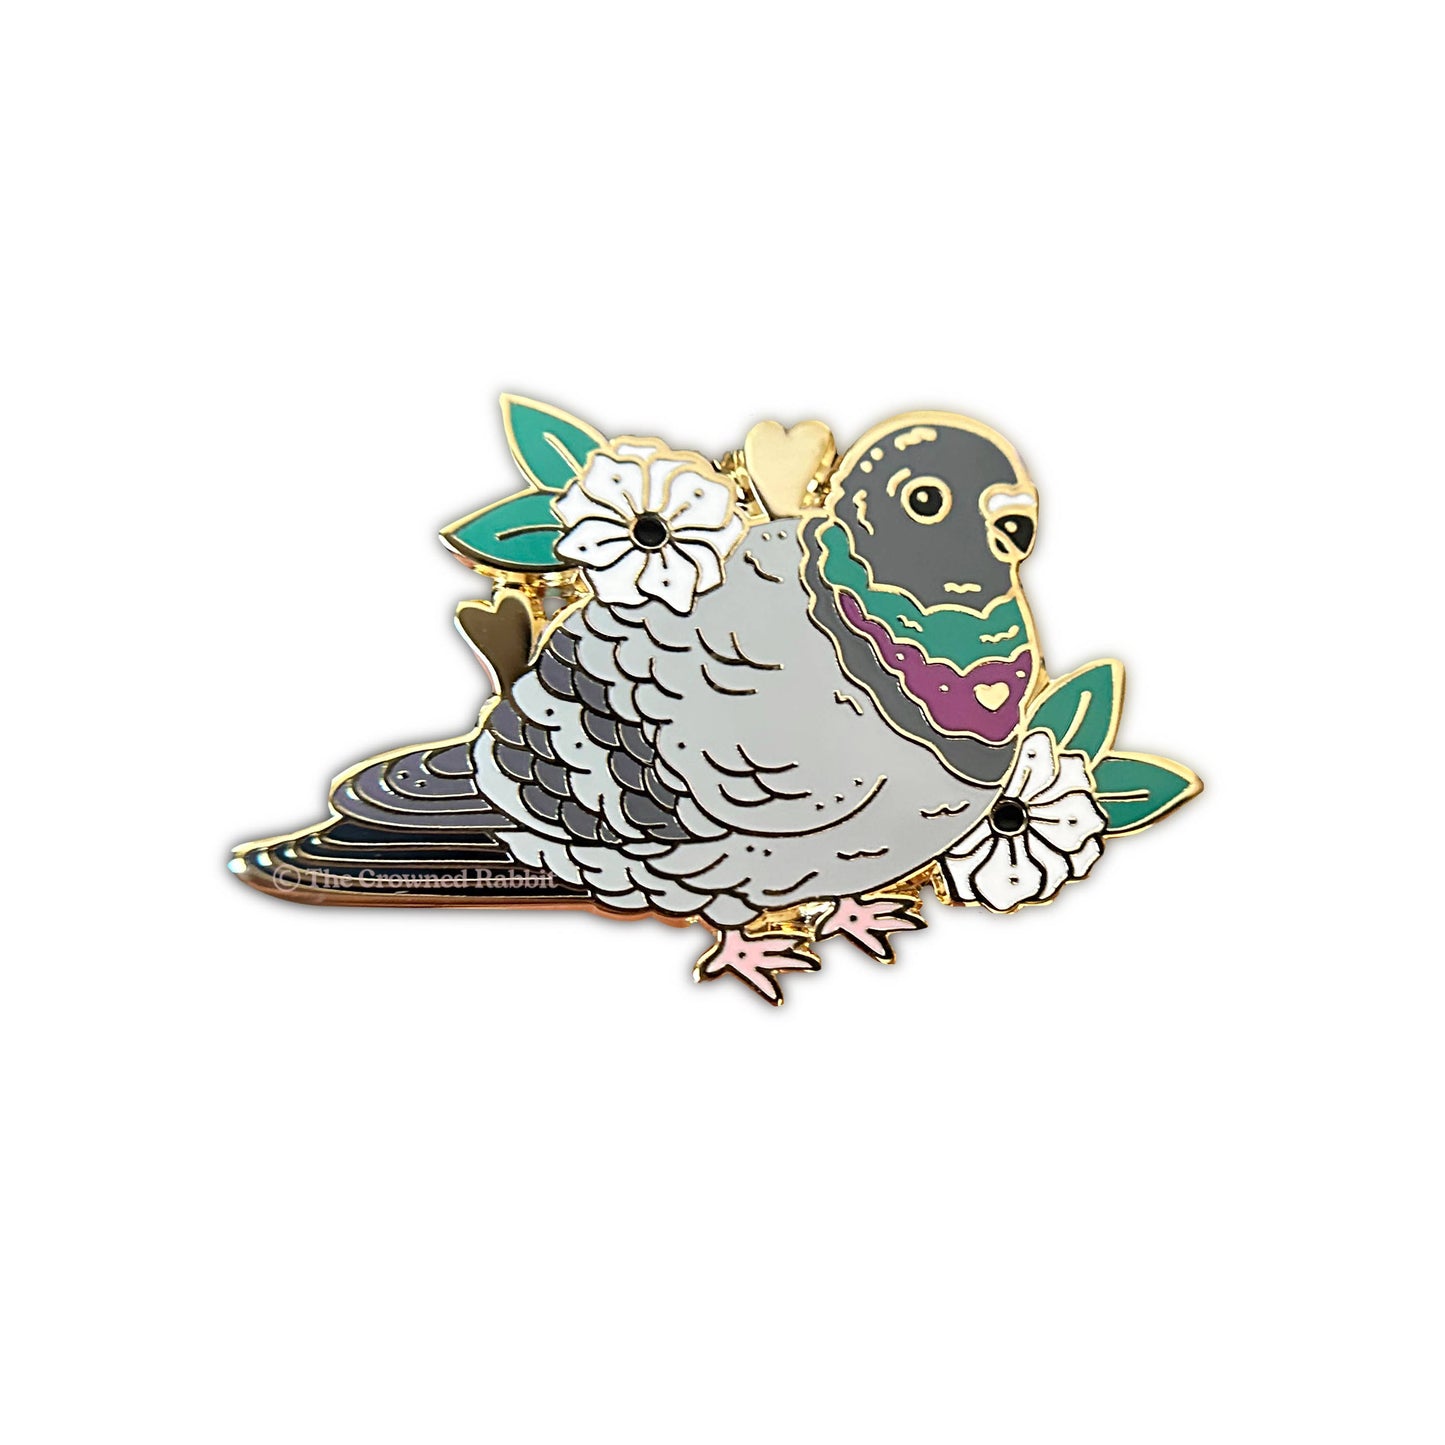 Pigeon Enamel Pin - expected mid August - reserve now!